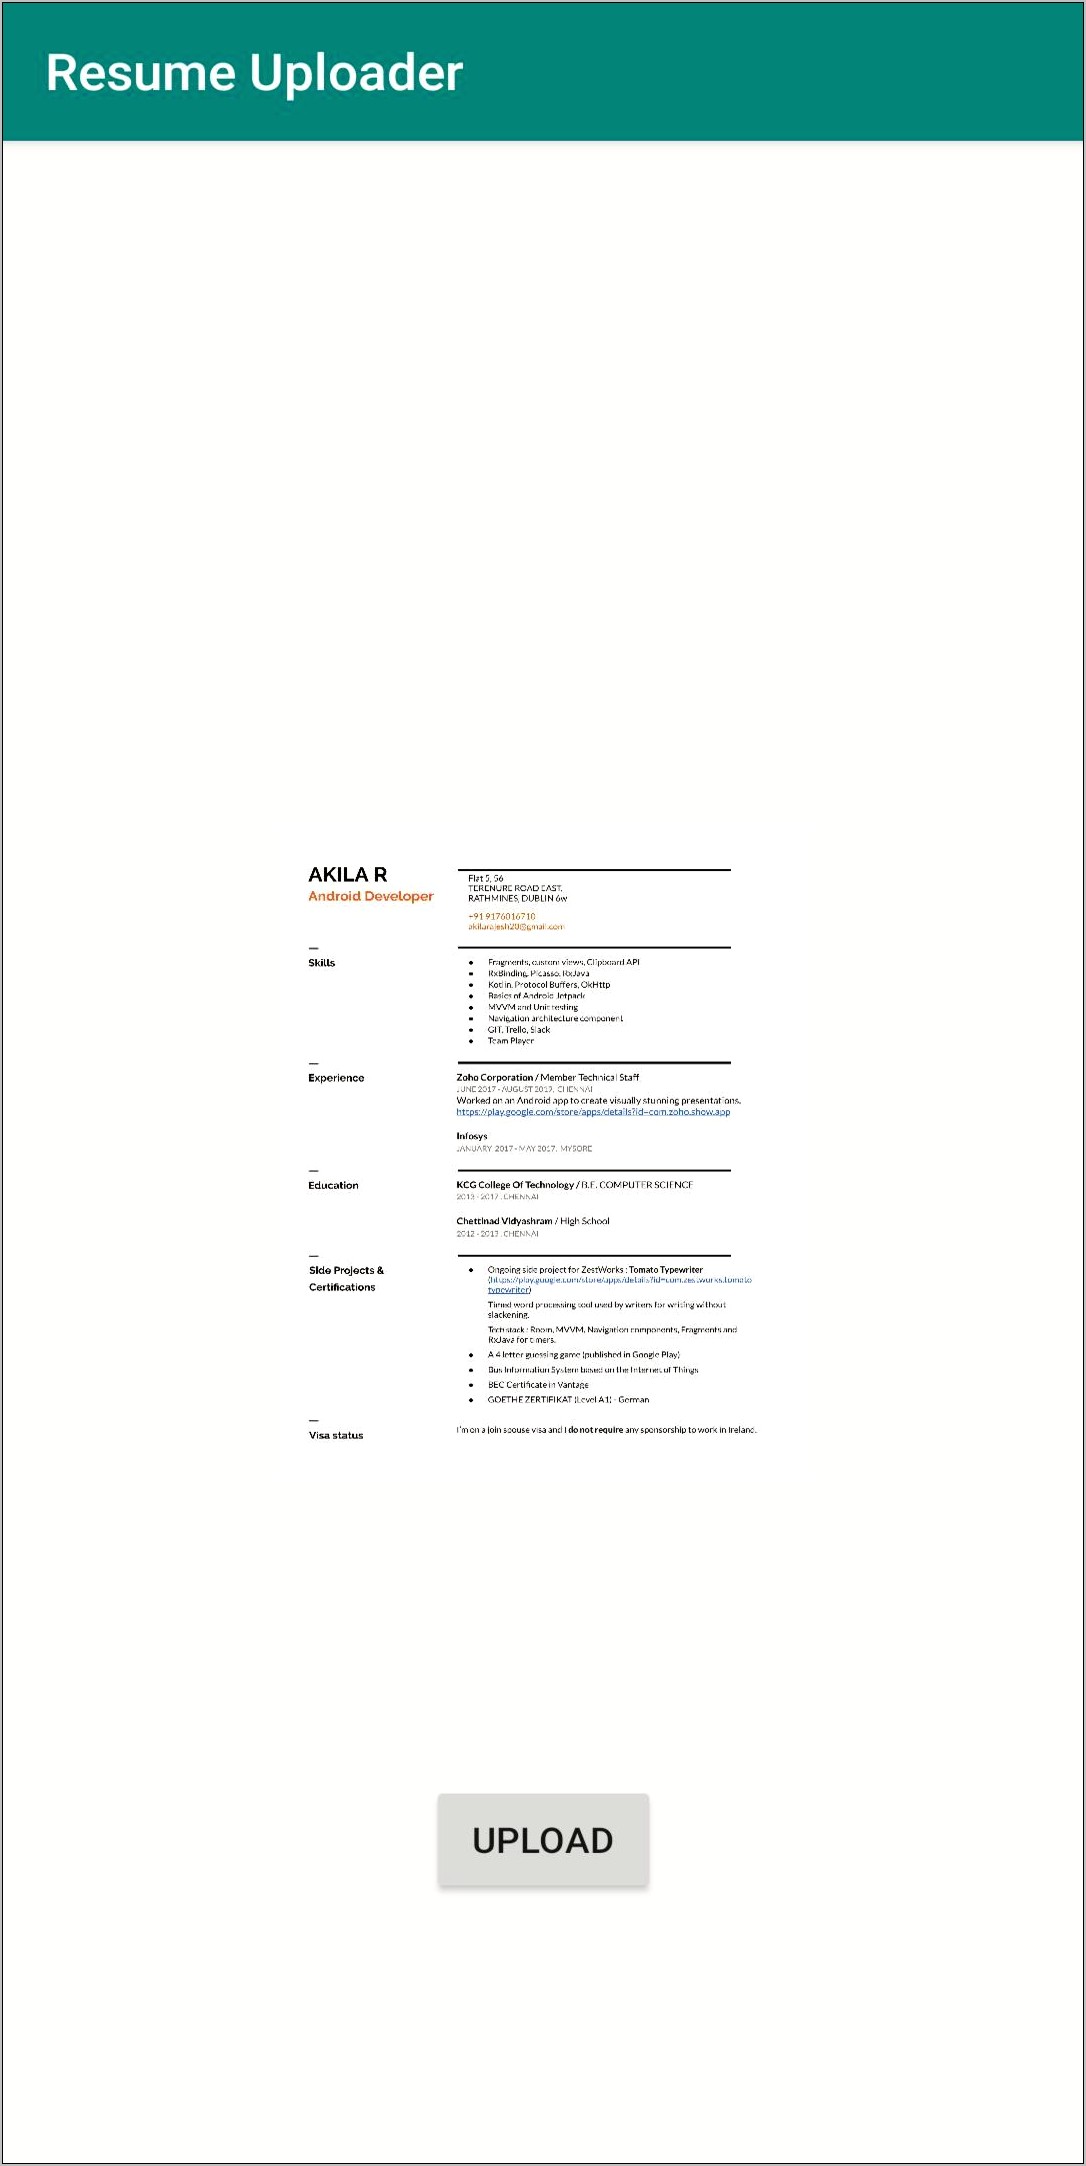 Android School Project Description In Resume